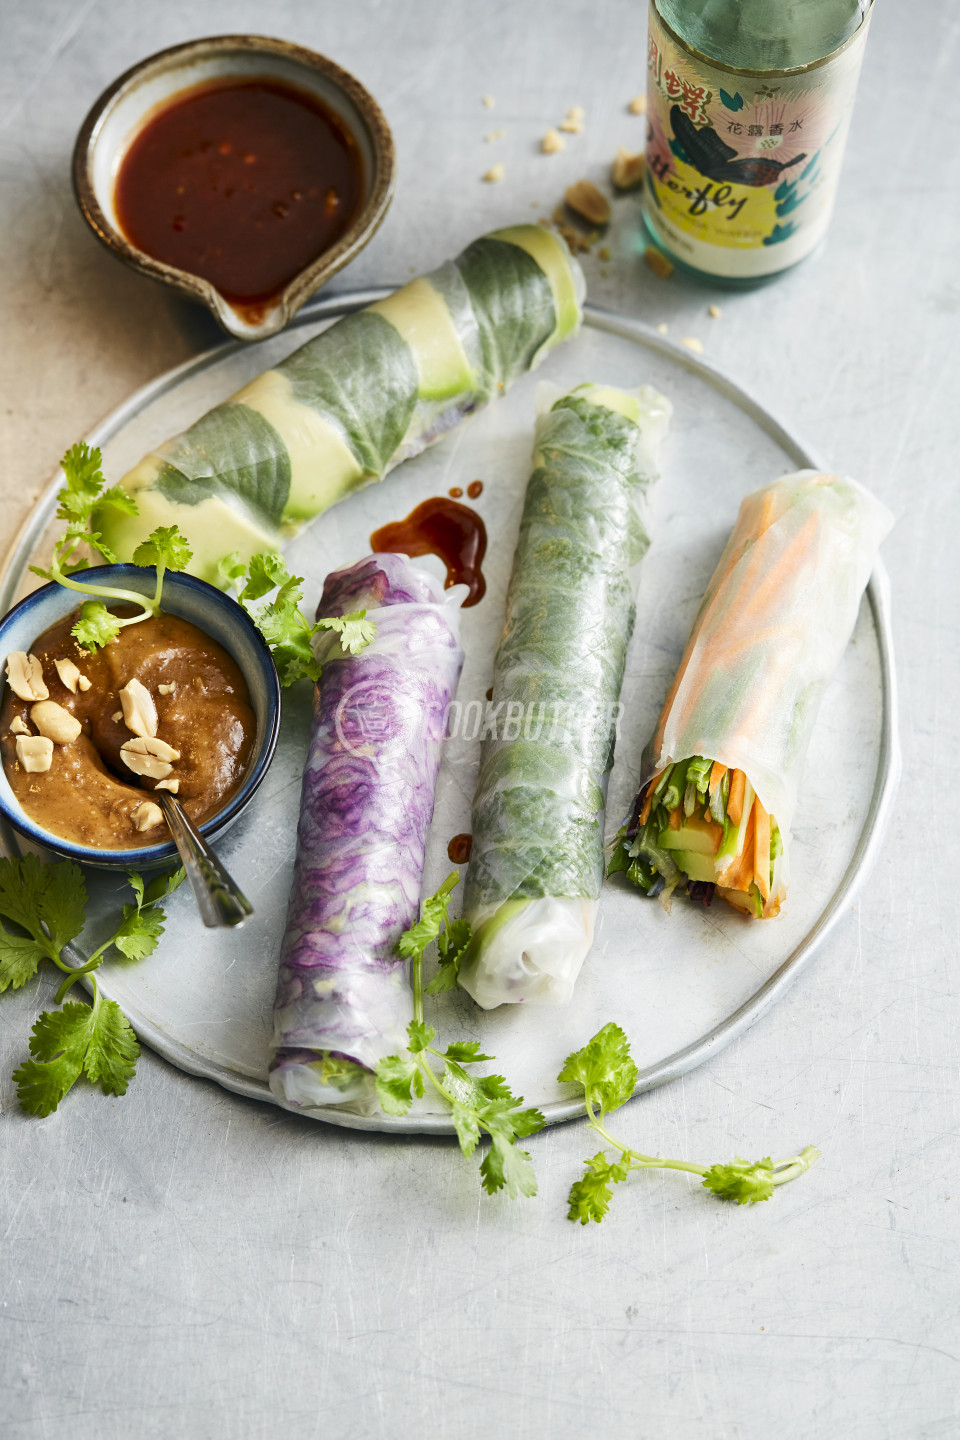 Summer rolls with vegetables and herbs with hoisin and peanut sauce (Vietnam) | preview